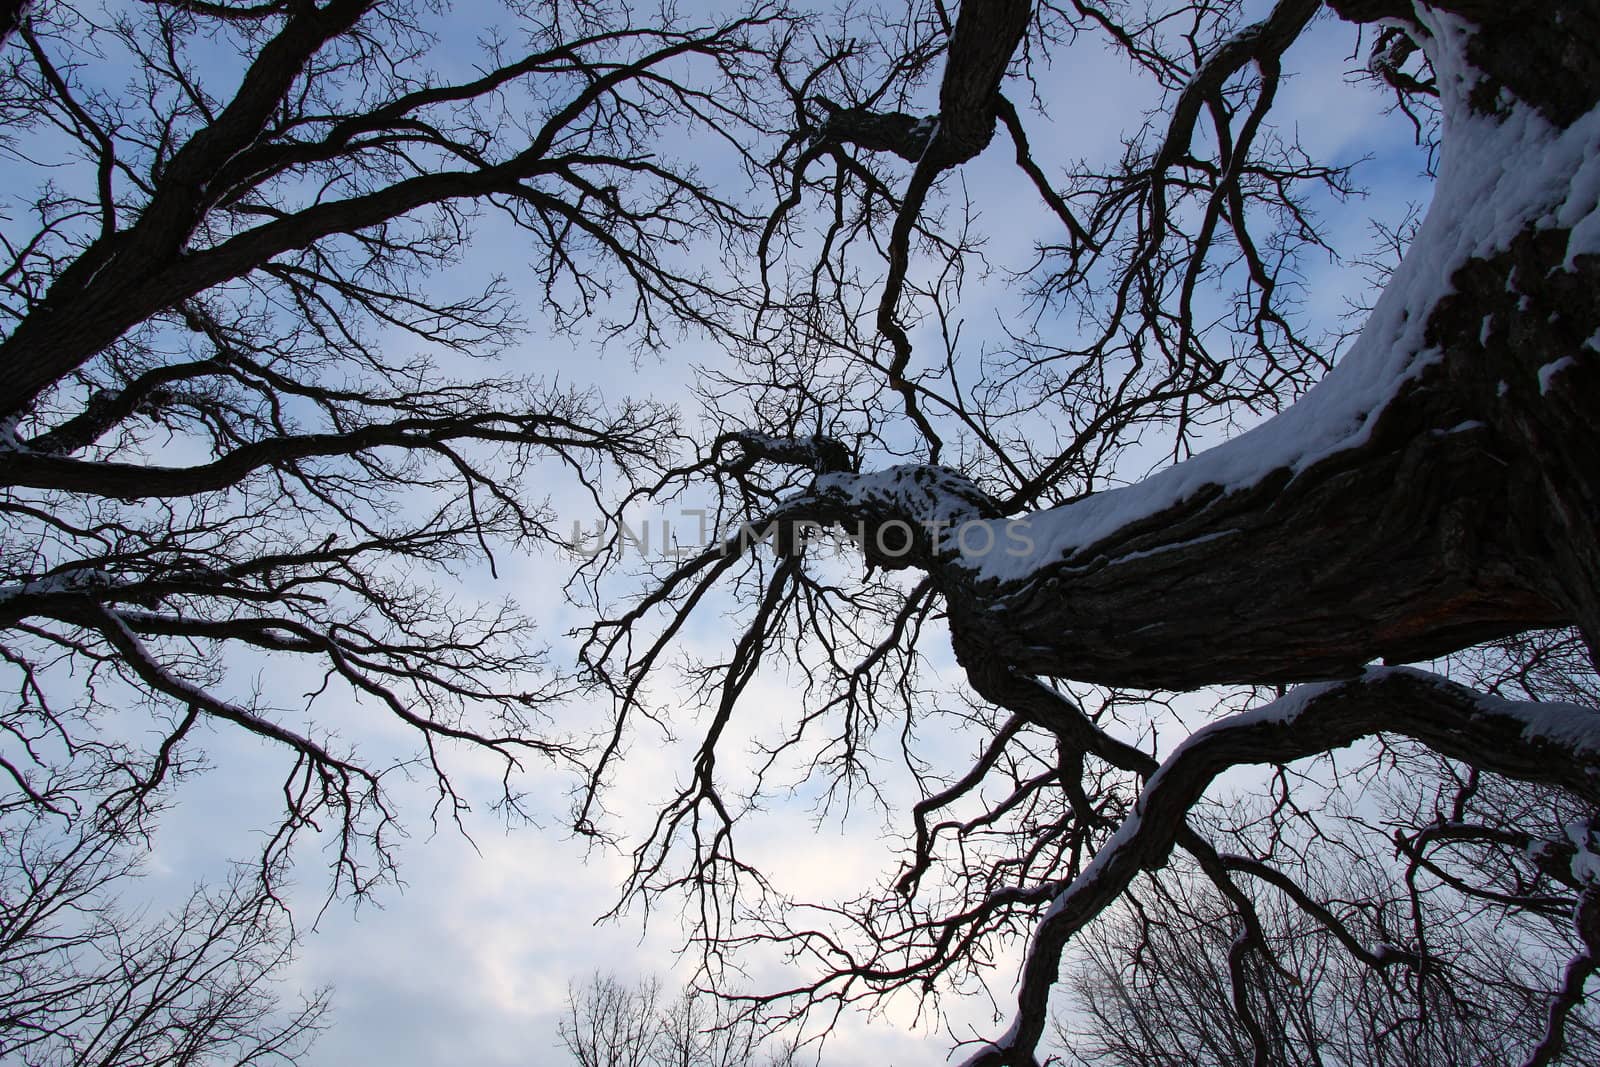 Twisted trees creep towards the sky during a cloudy winter day in Illinois